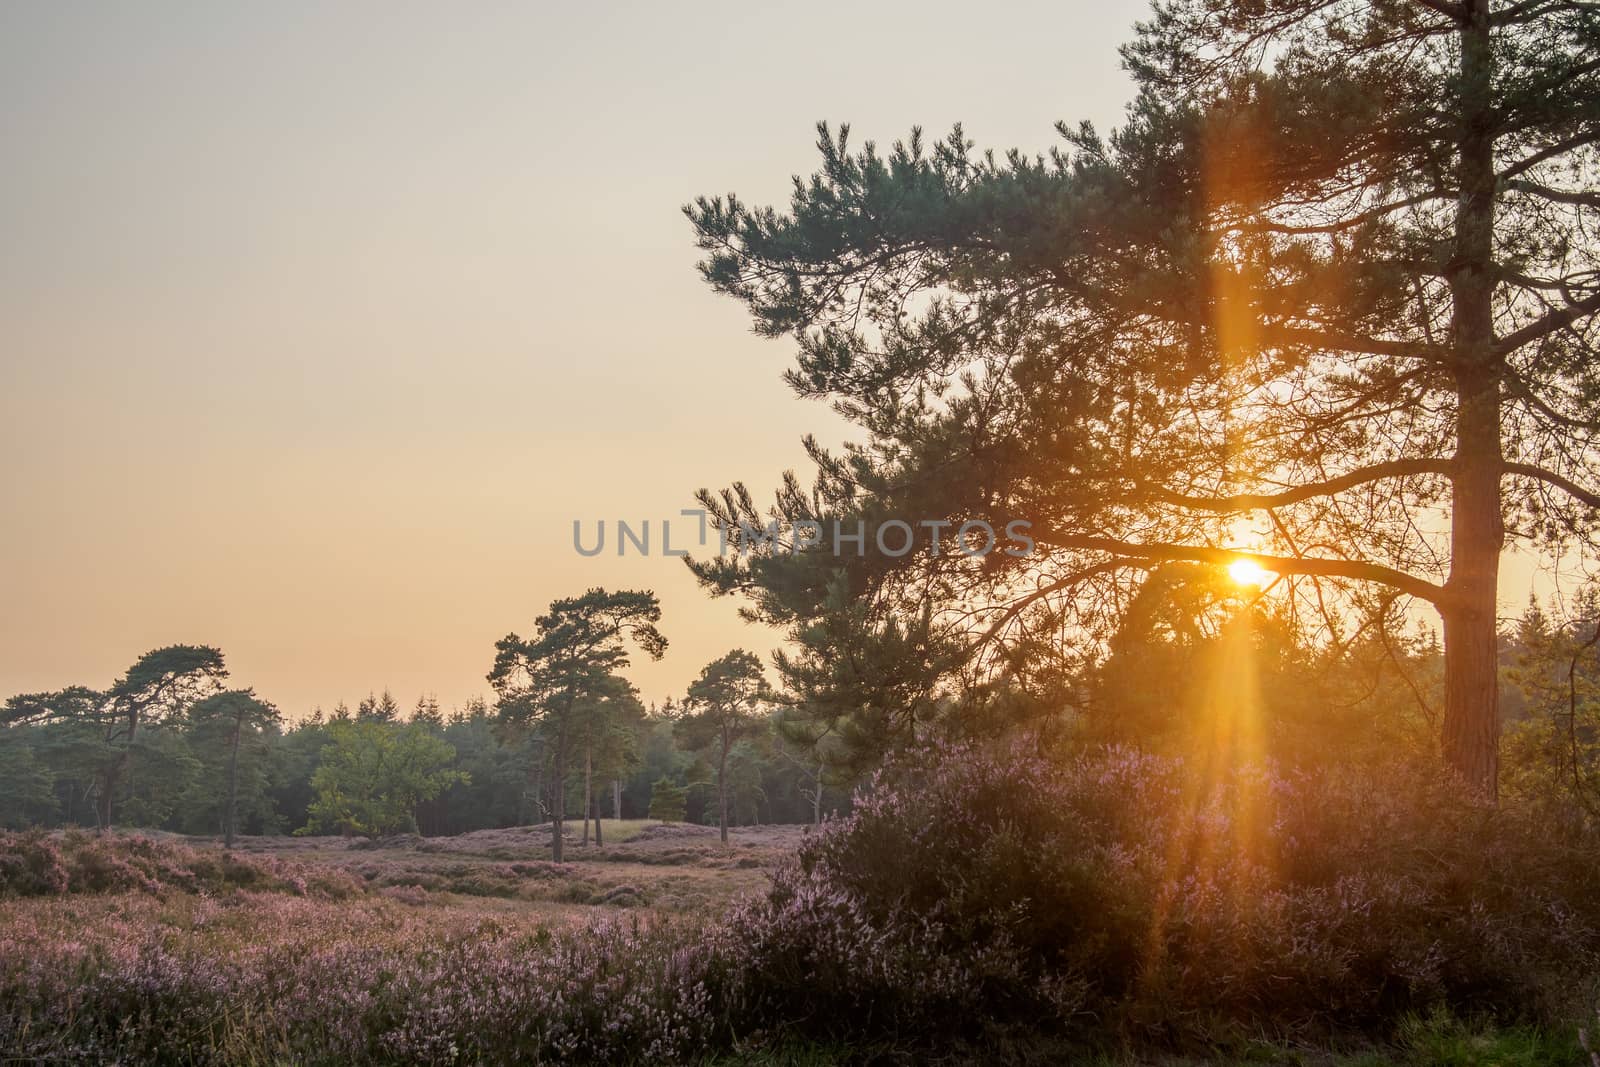 Golden sunset as sun flares through tree branches over blooming heathland